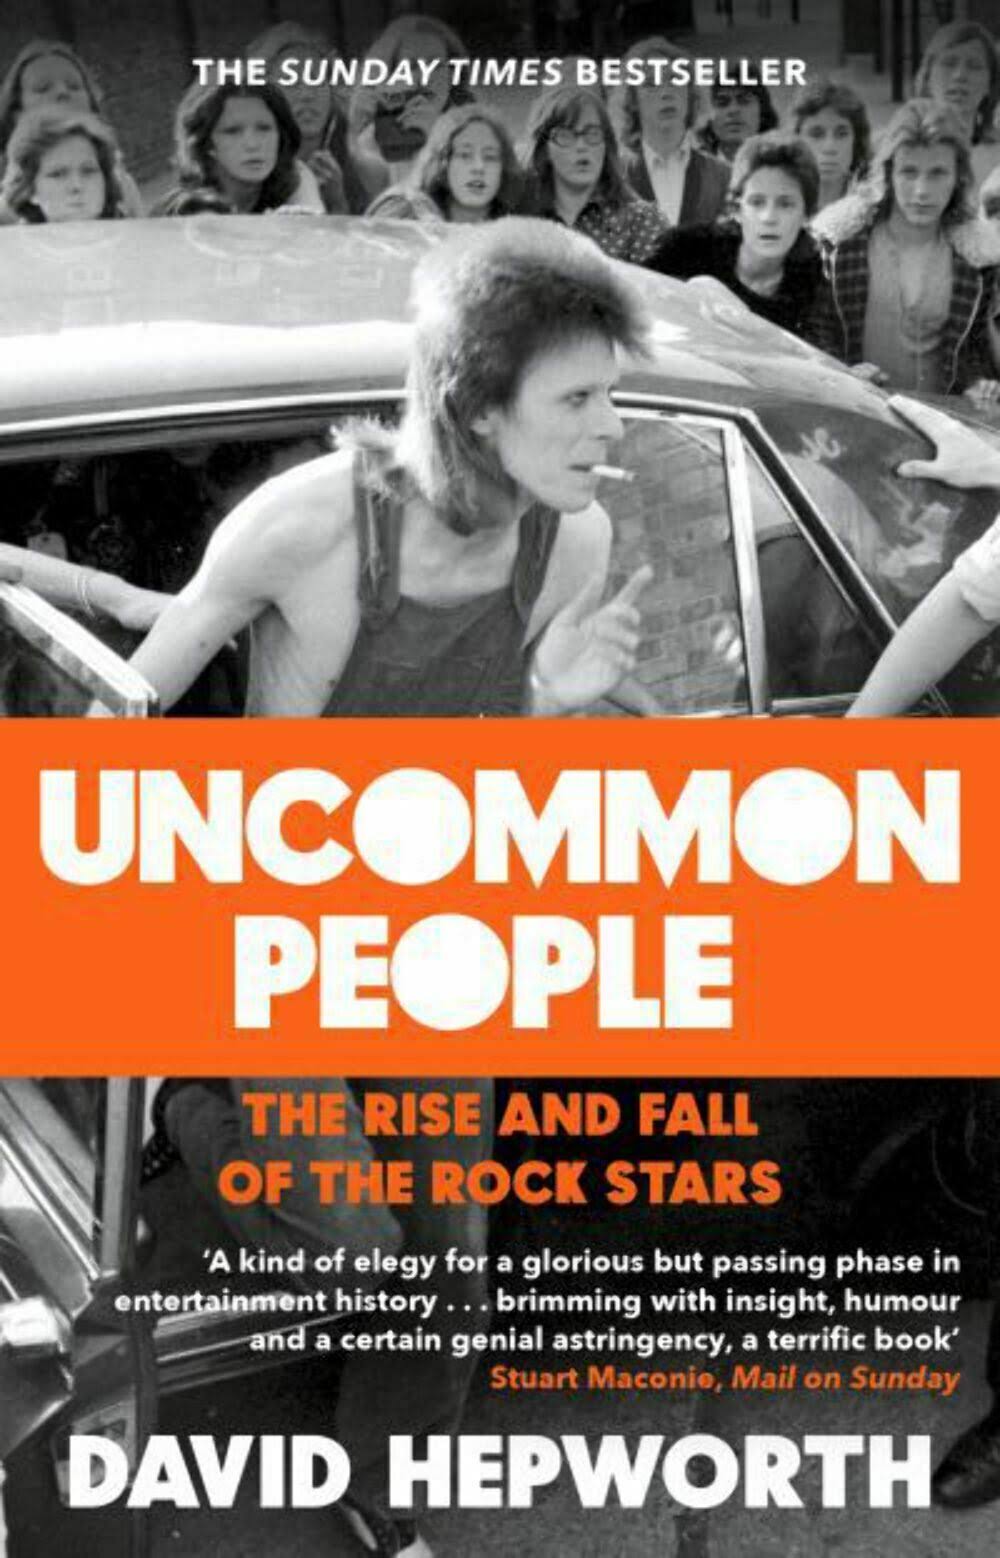 Uncommon People: The Rise And Fall Of The Rock Stars 1955-1994 - David Hepworth